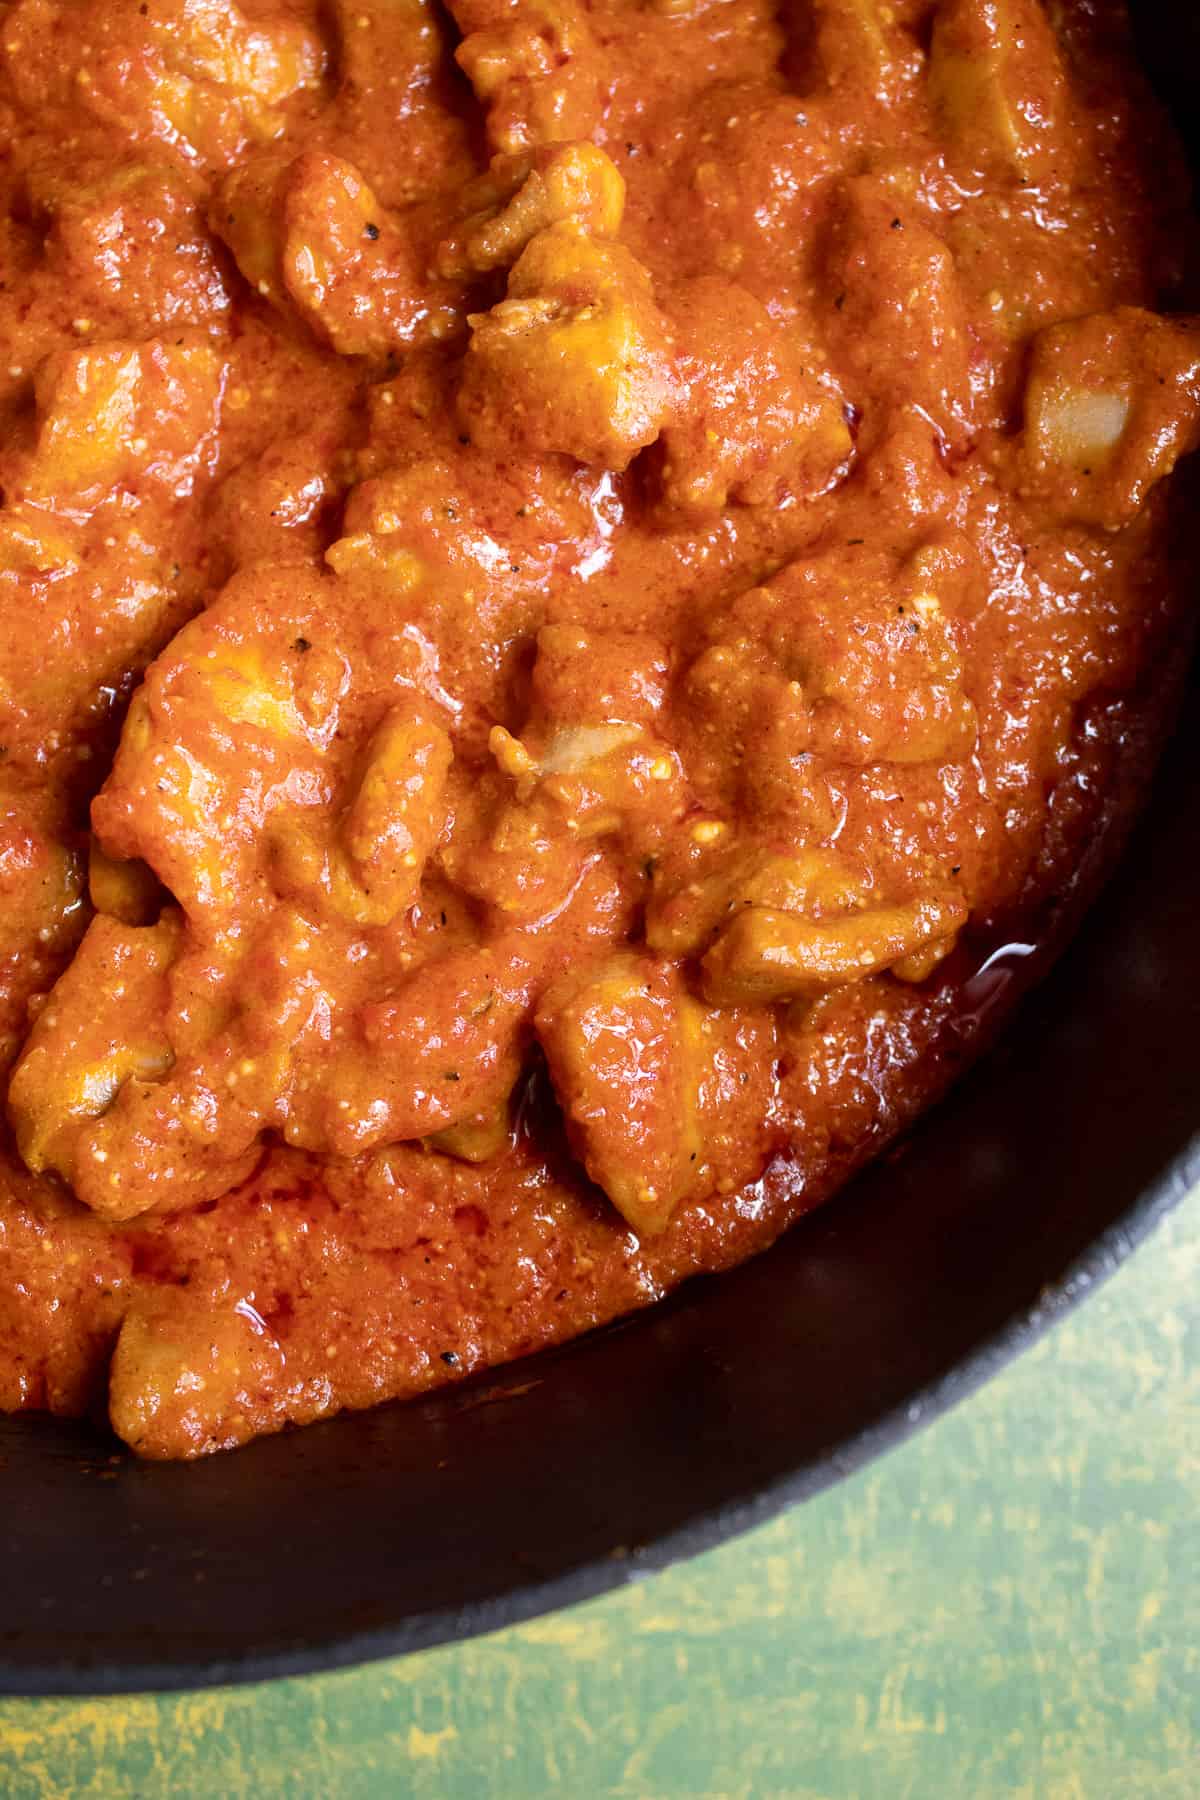 A detailed photo of the orange sauce and chicken in the skillet once fully cooked.